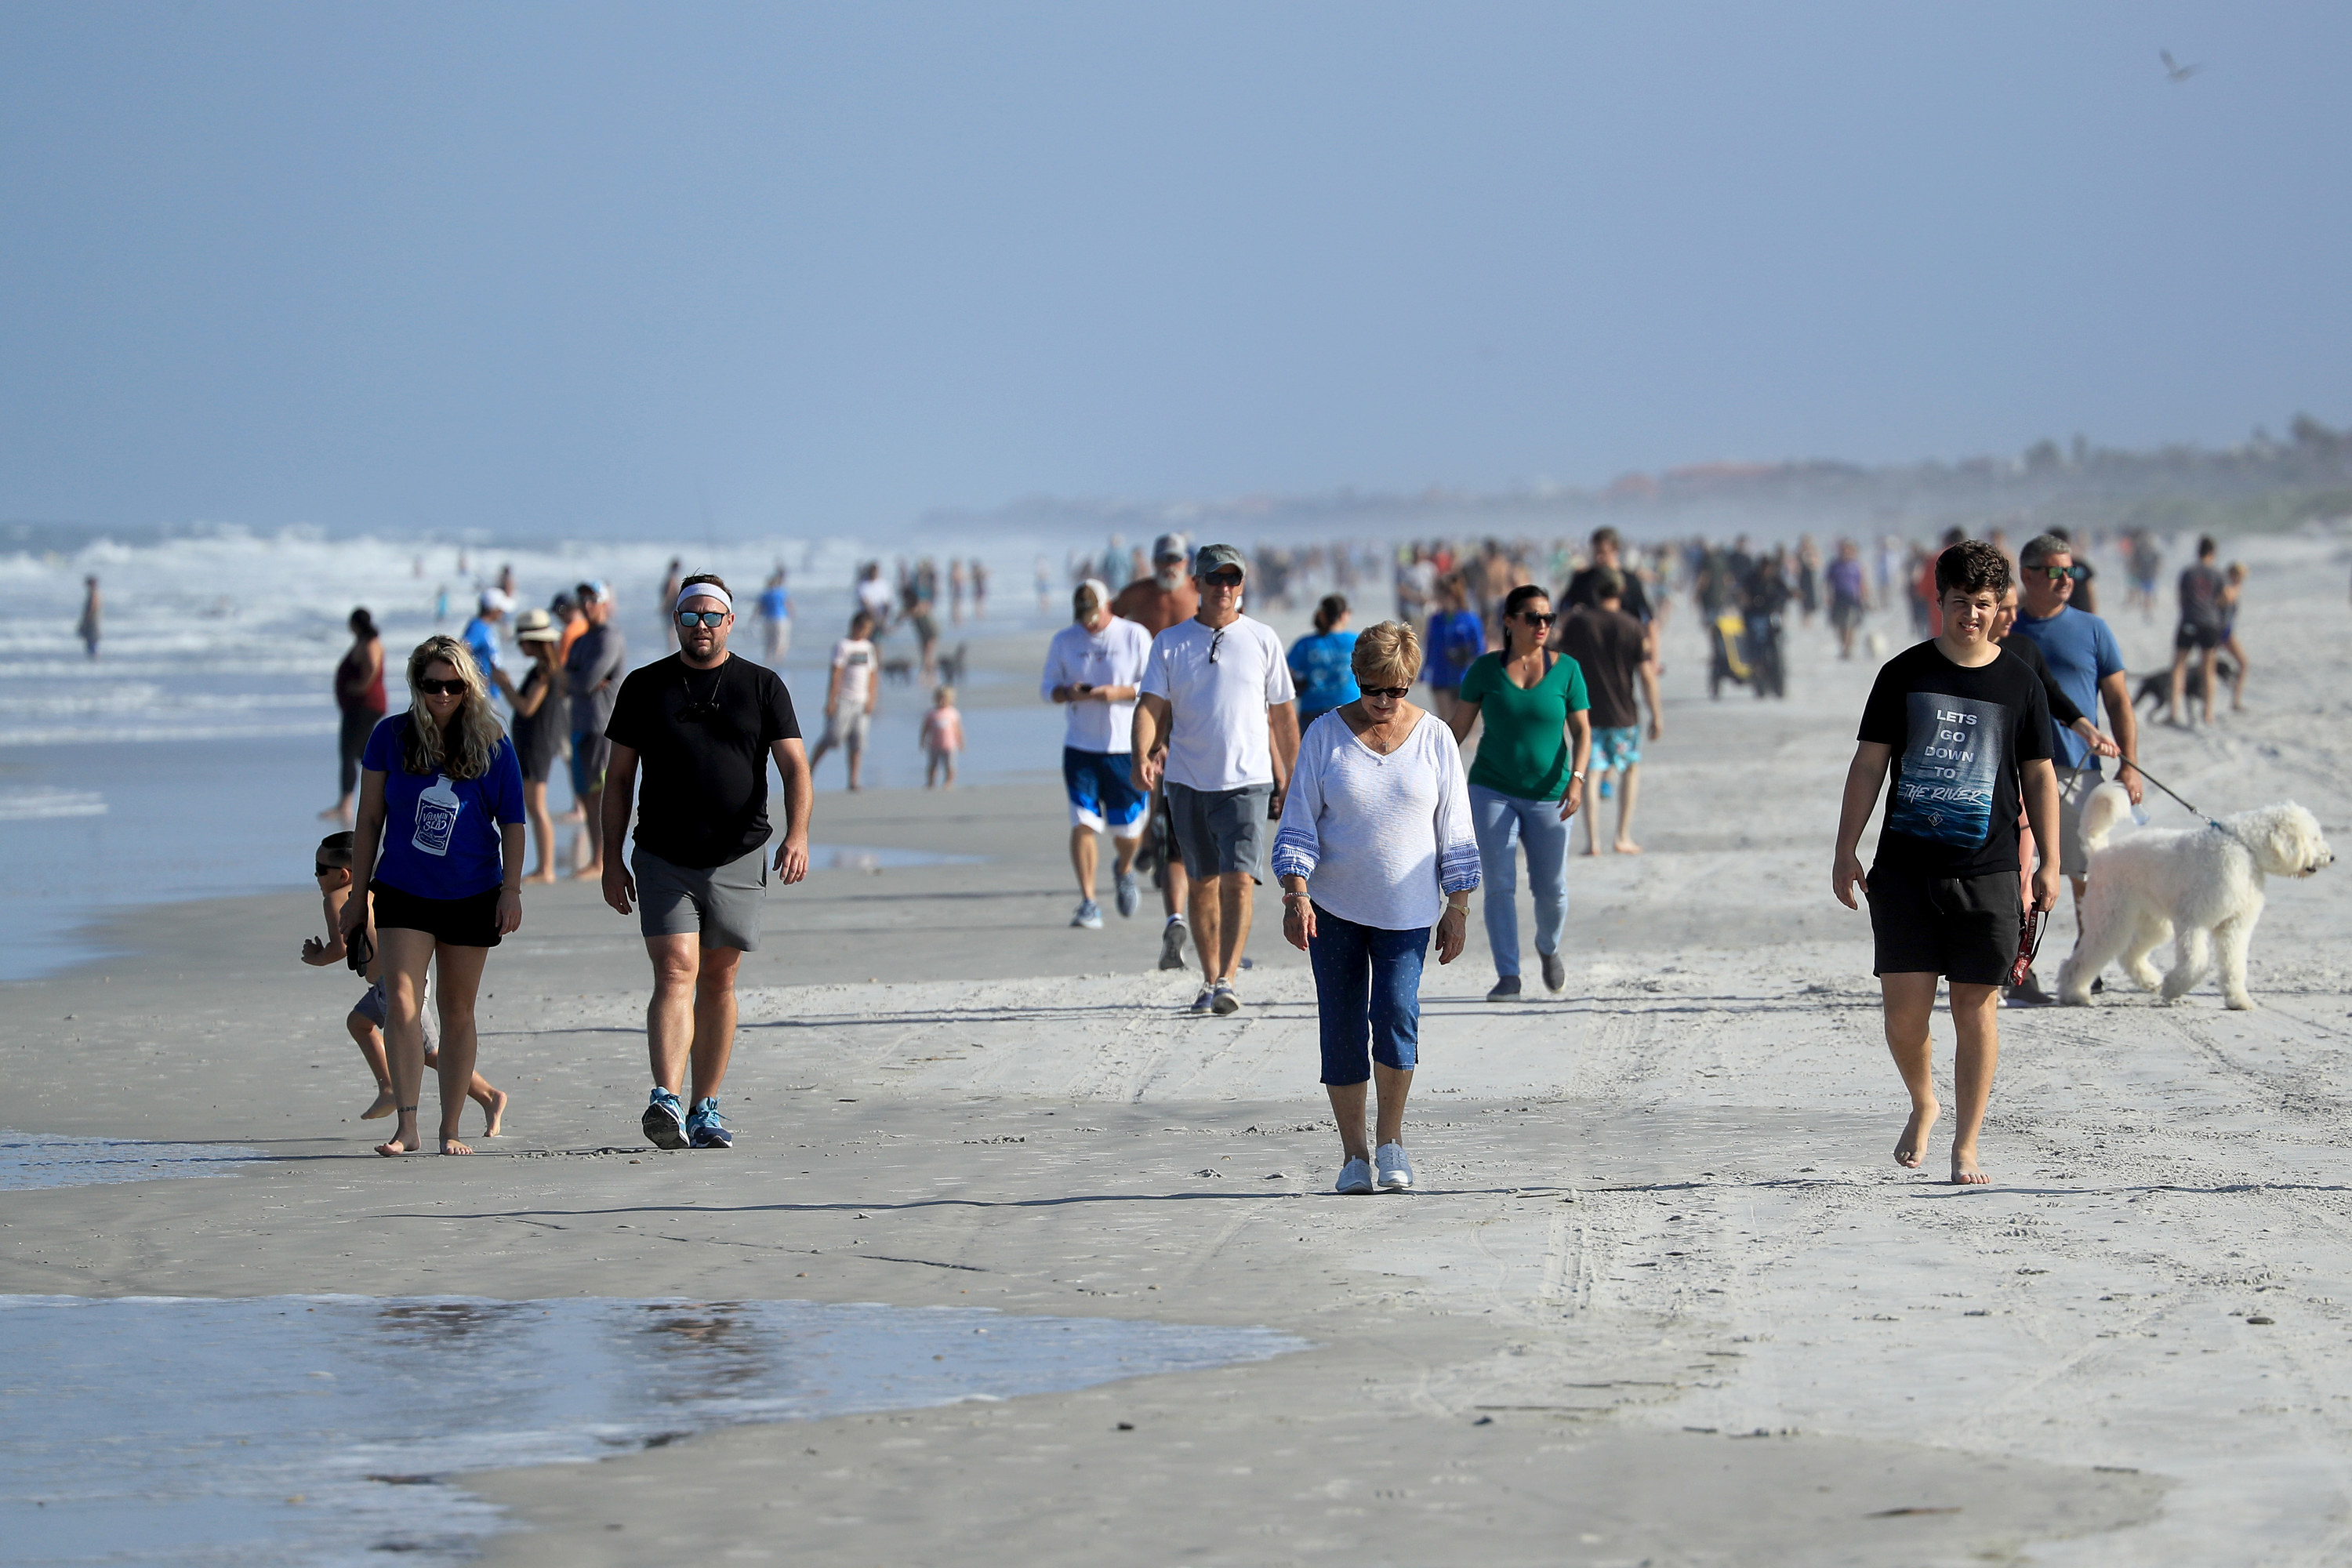 Crowd of people walking on a beach in Florida without masks